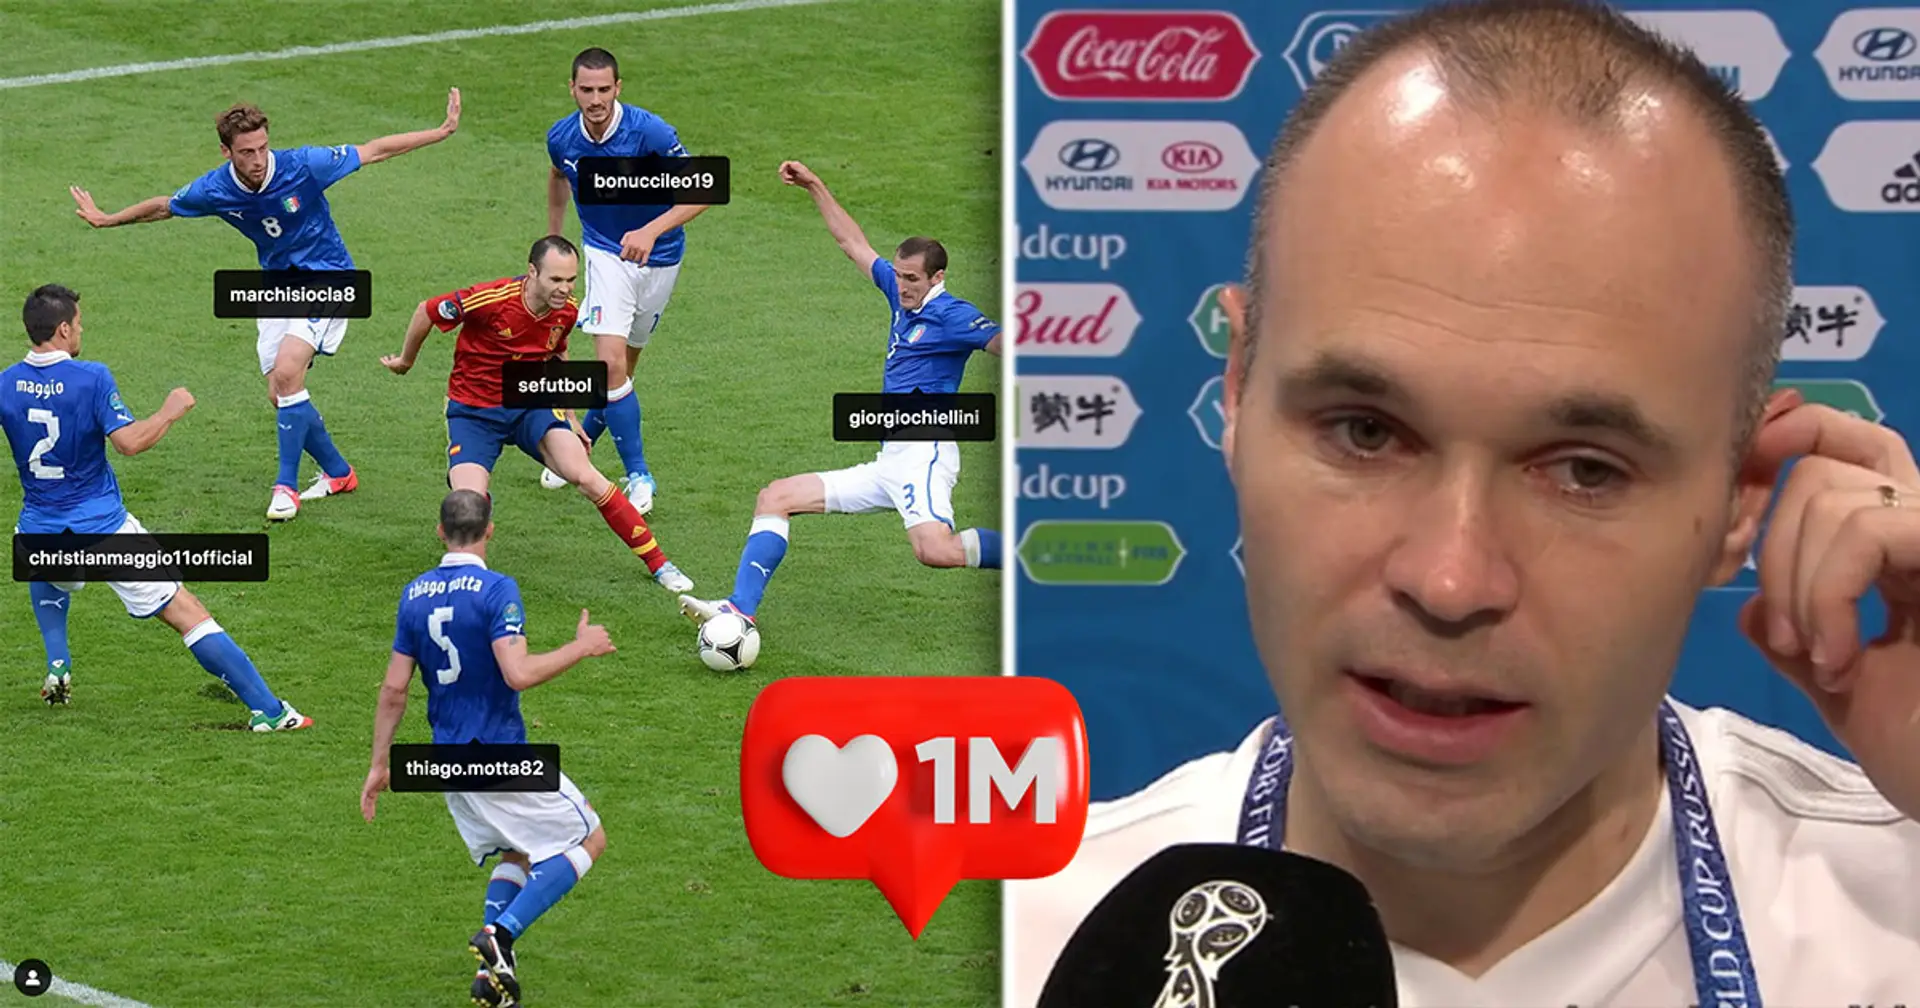 What's so special about this Iniesta photo that has collected 1+ million 'likes'